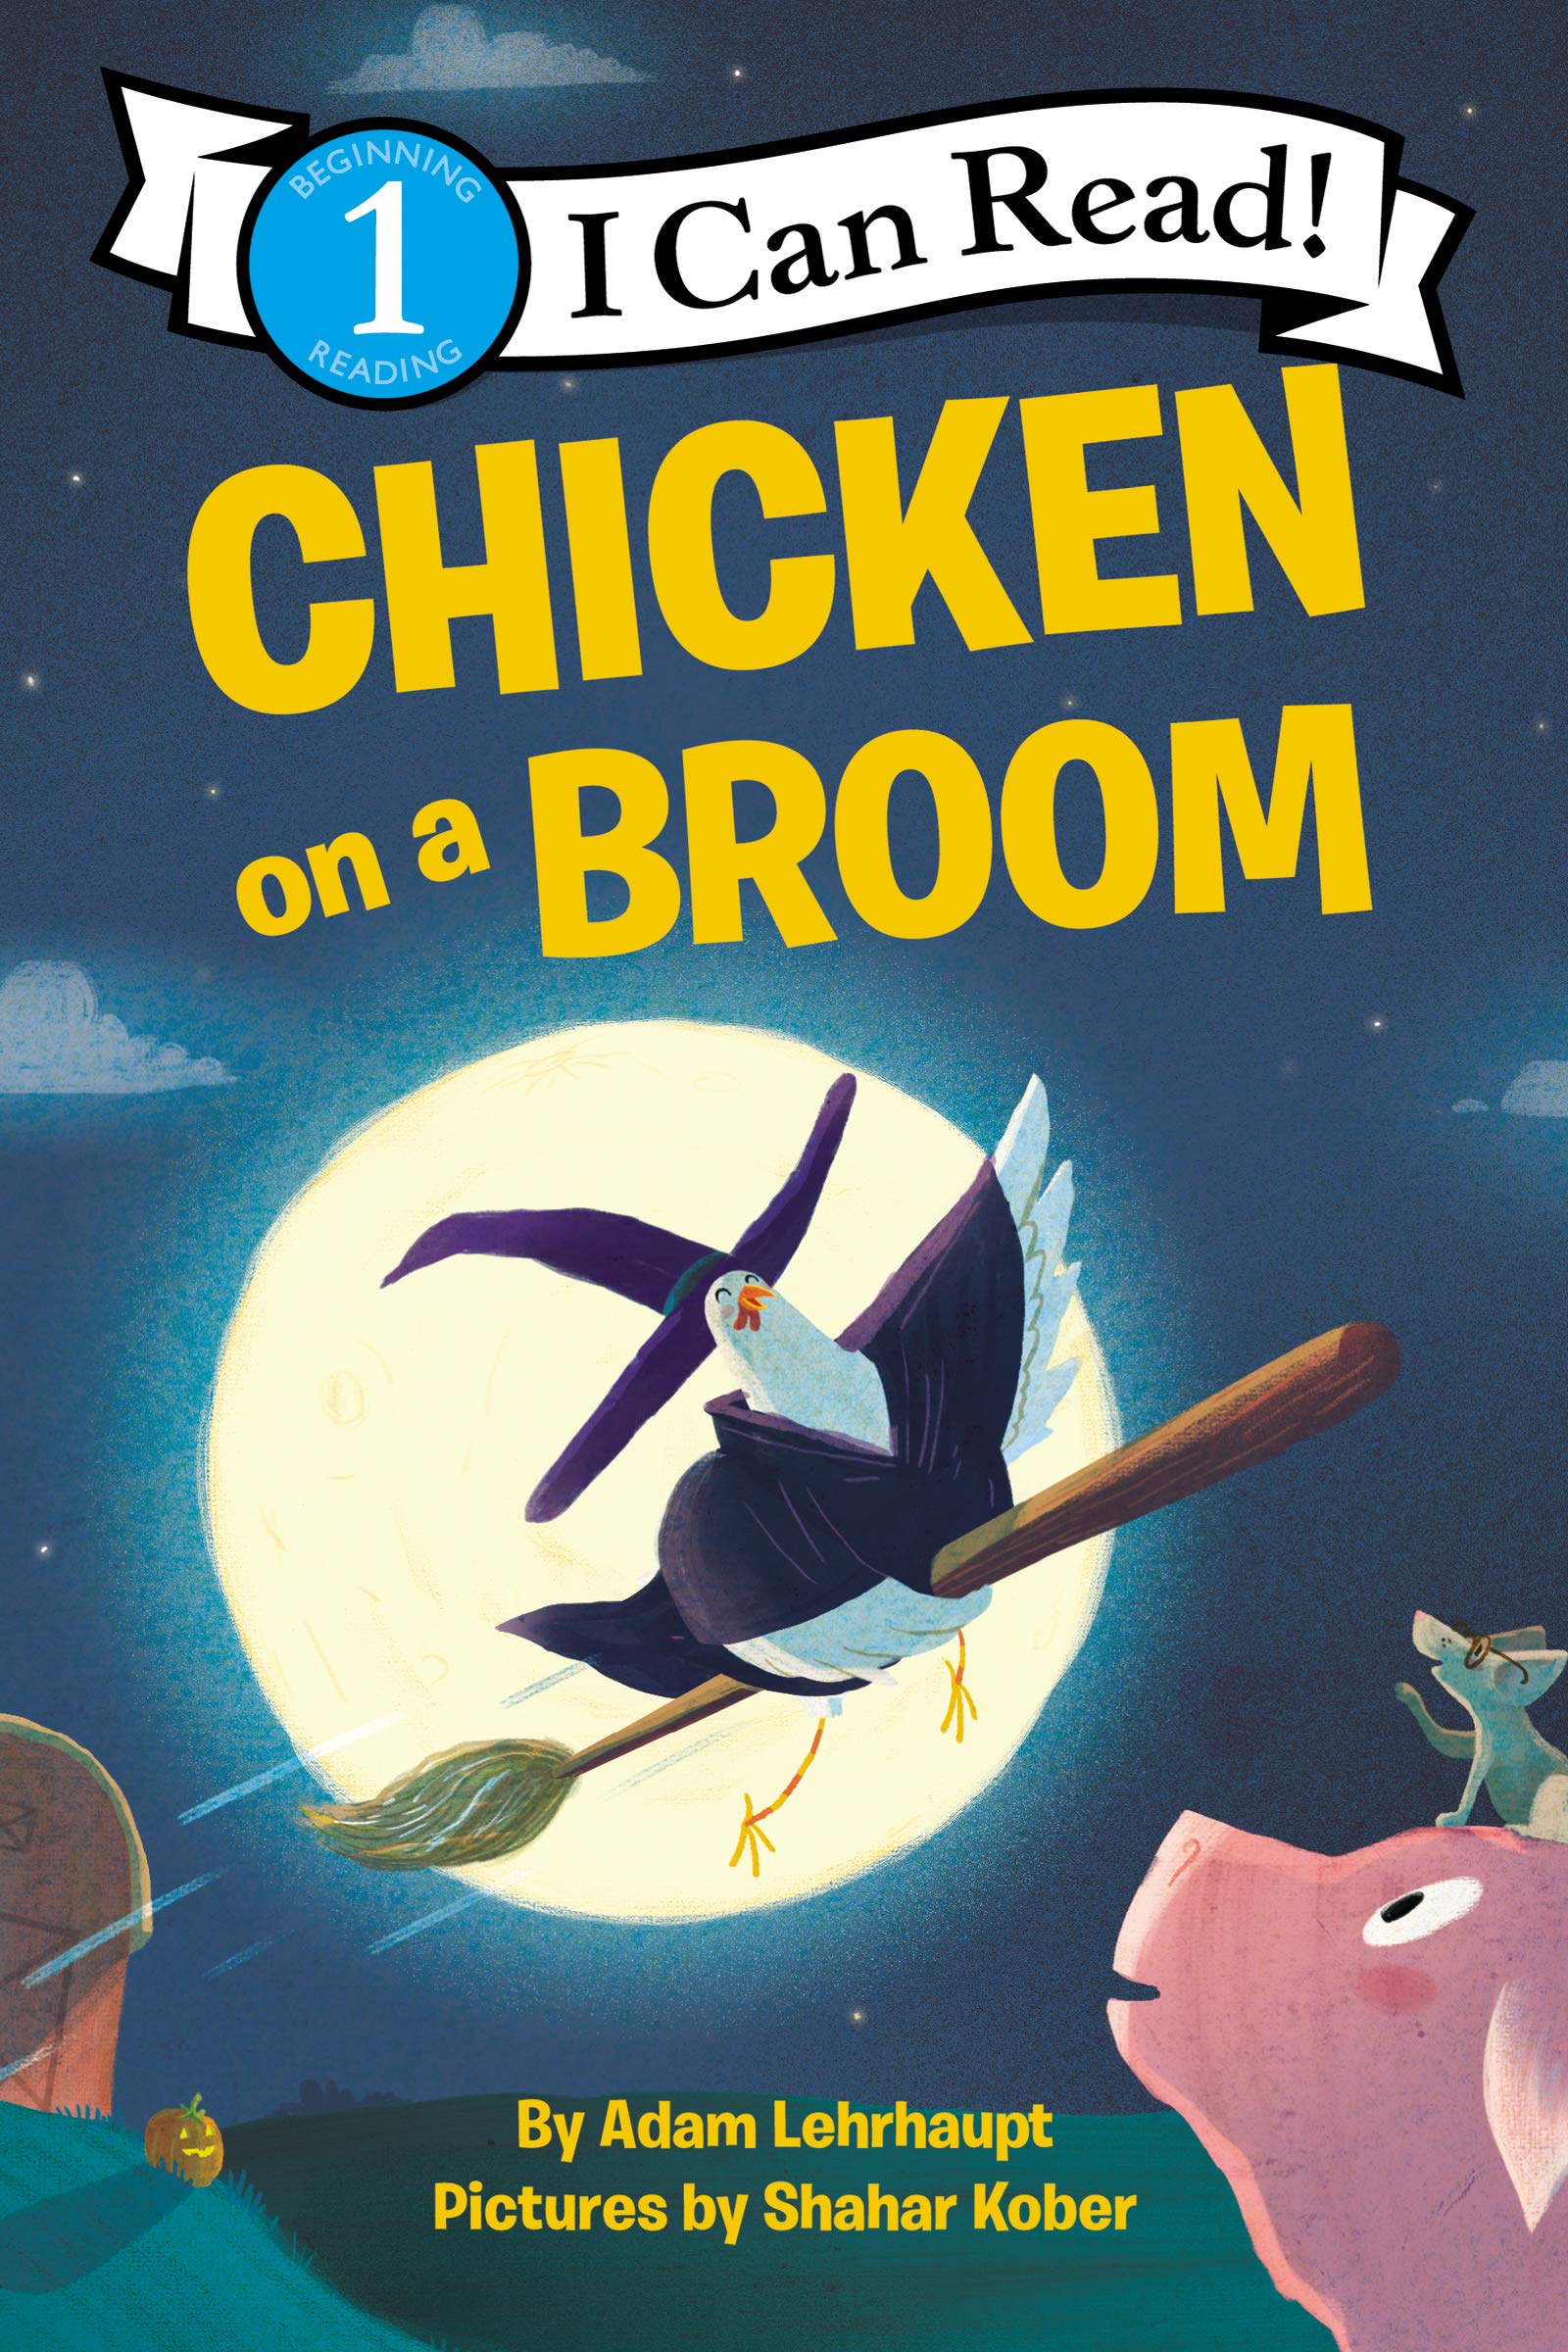 IMG : I can Read Level 1 Chicken on a Broom